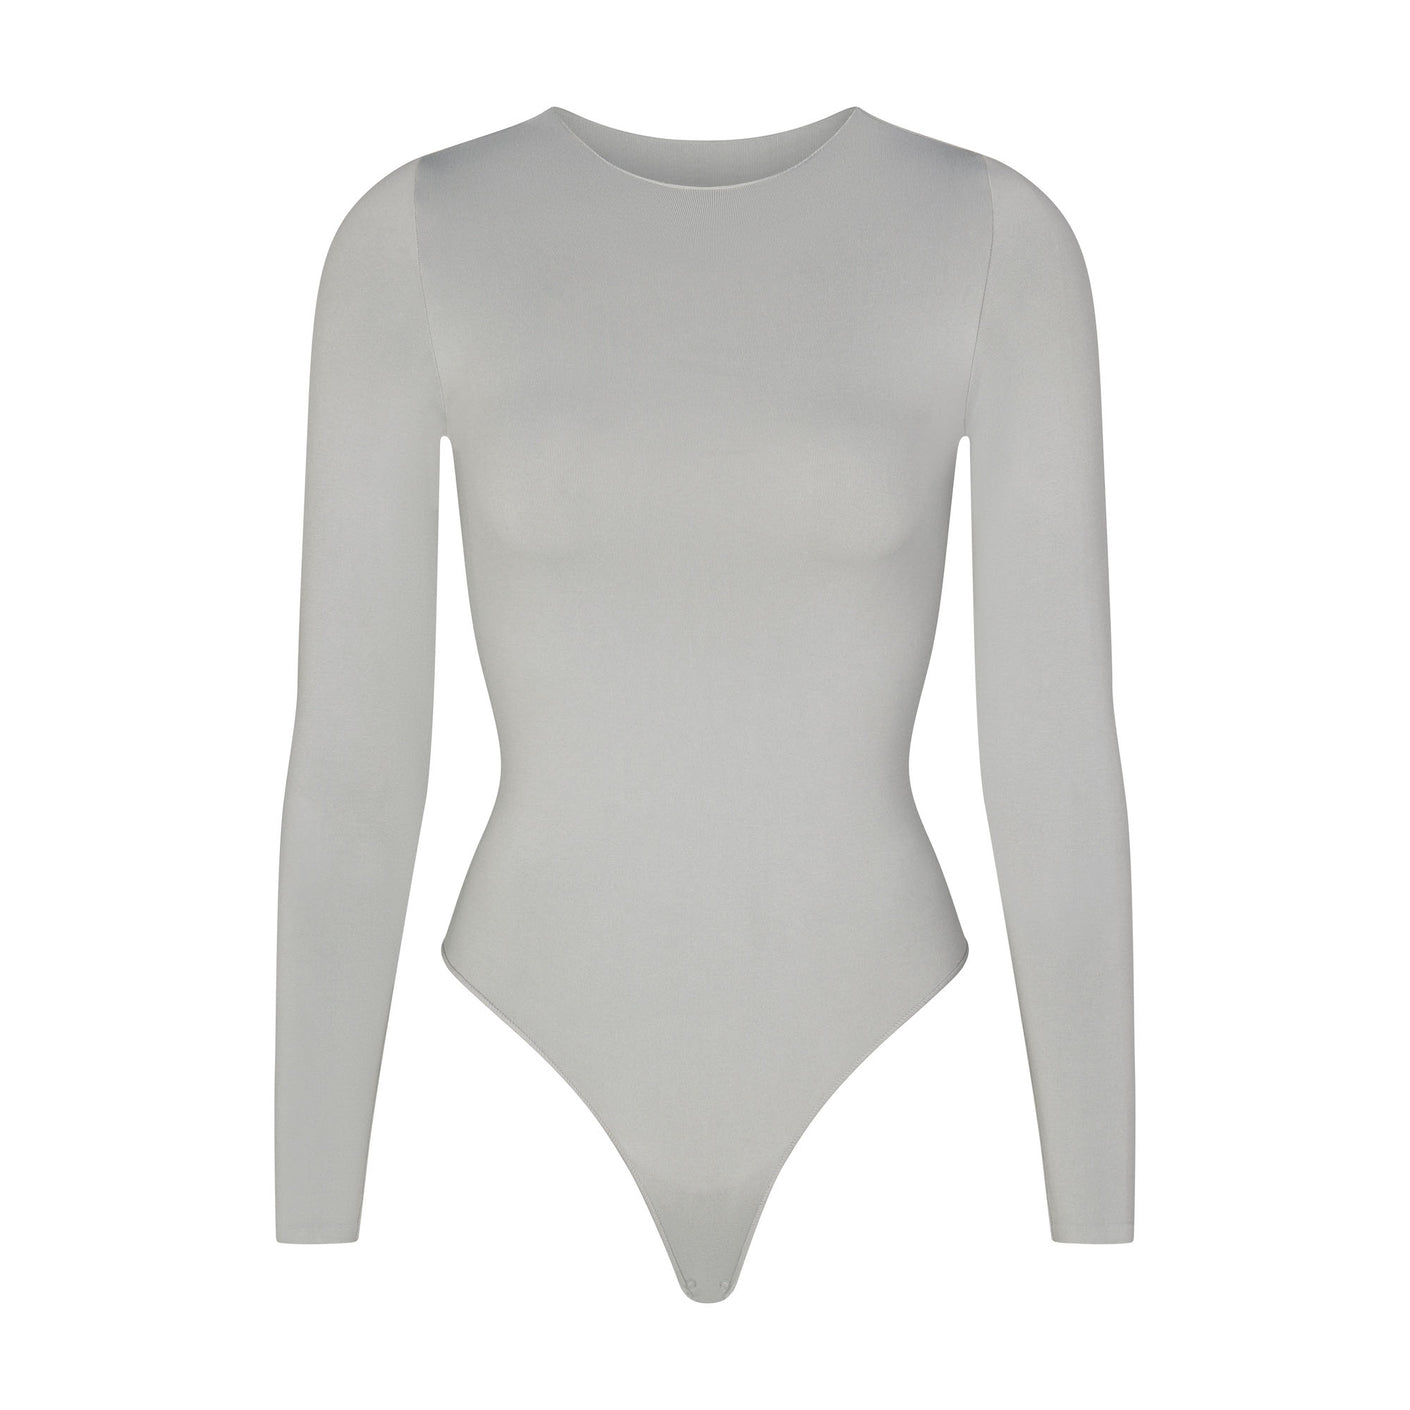 SKIMS Raw Edge Bodysuit Gray Size XS - $40 (31% Off Retail) New With Tags -  From Masha